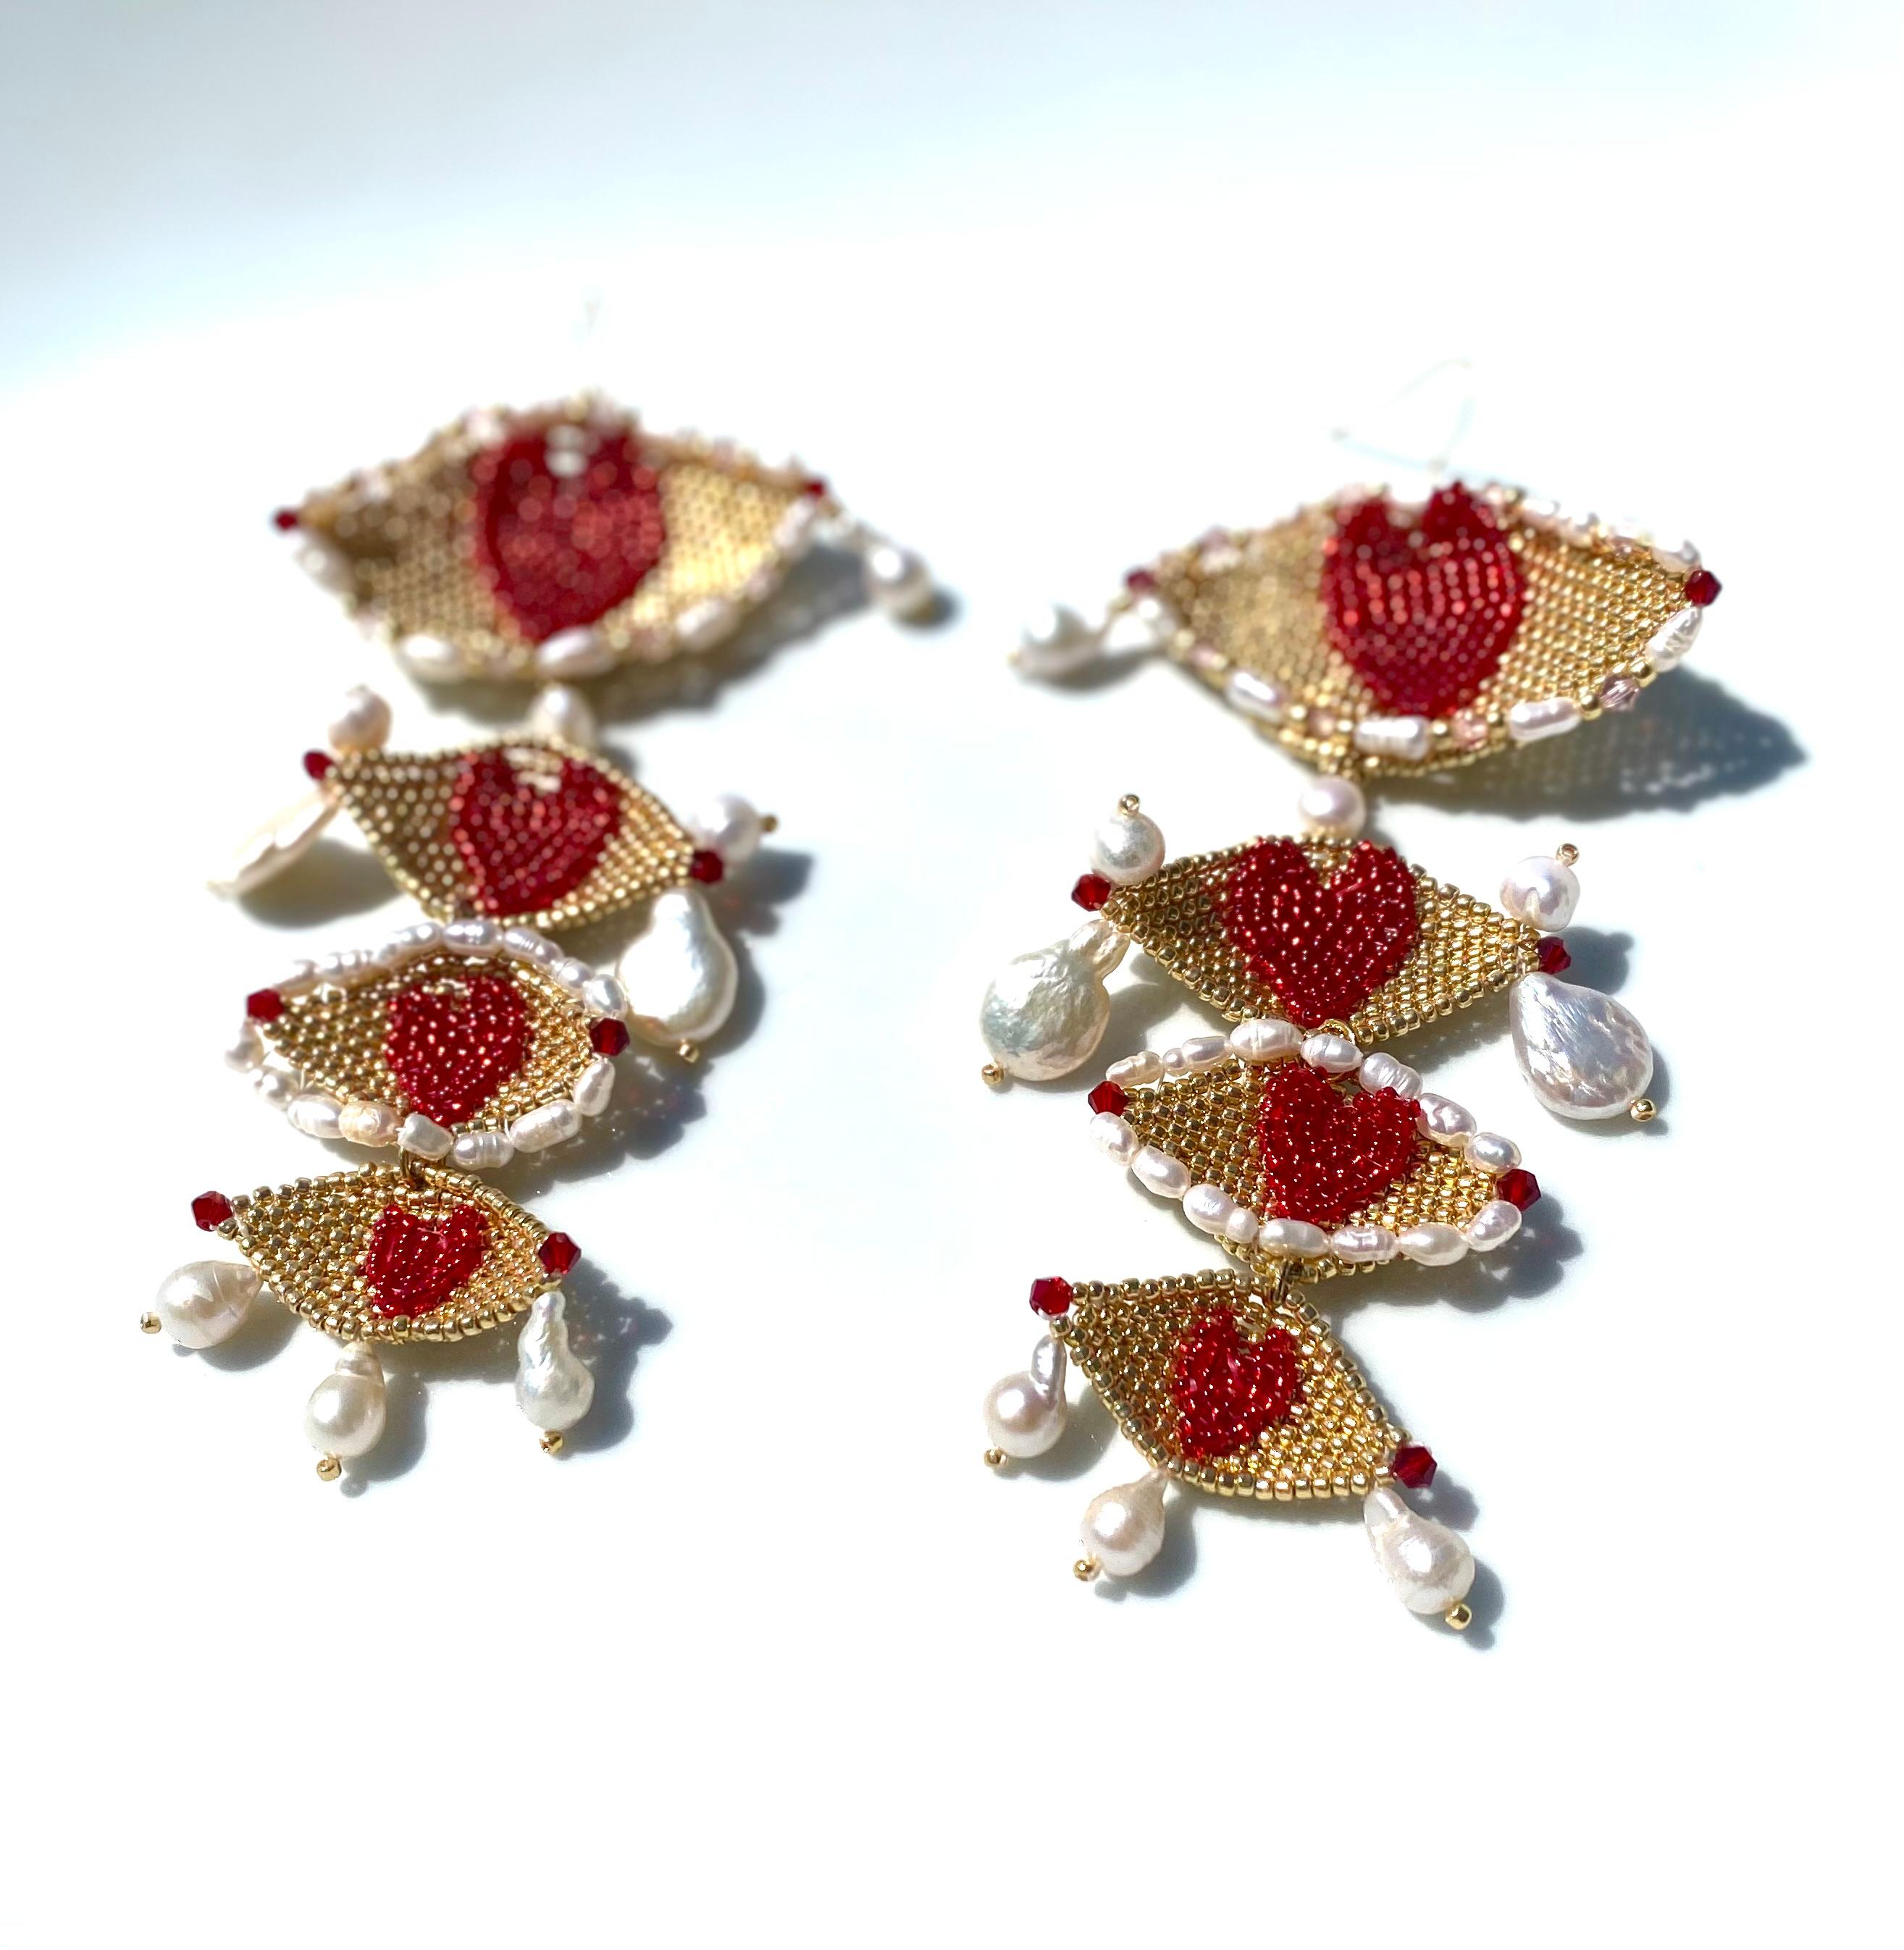 Inspired by Salvador Dali's, The Eye of Time this earring consists of four hand woven eyes shapes in permanent gold plated seed beads with scarlett red hand woven hearts as the pupils. Each woven eye is embroidered with Swarovski Crystals in red,